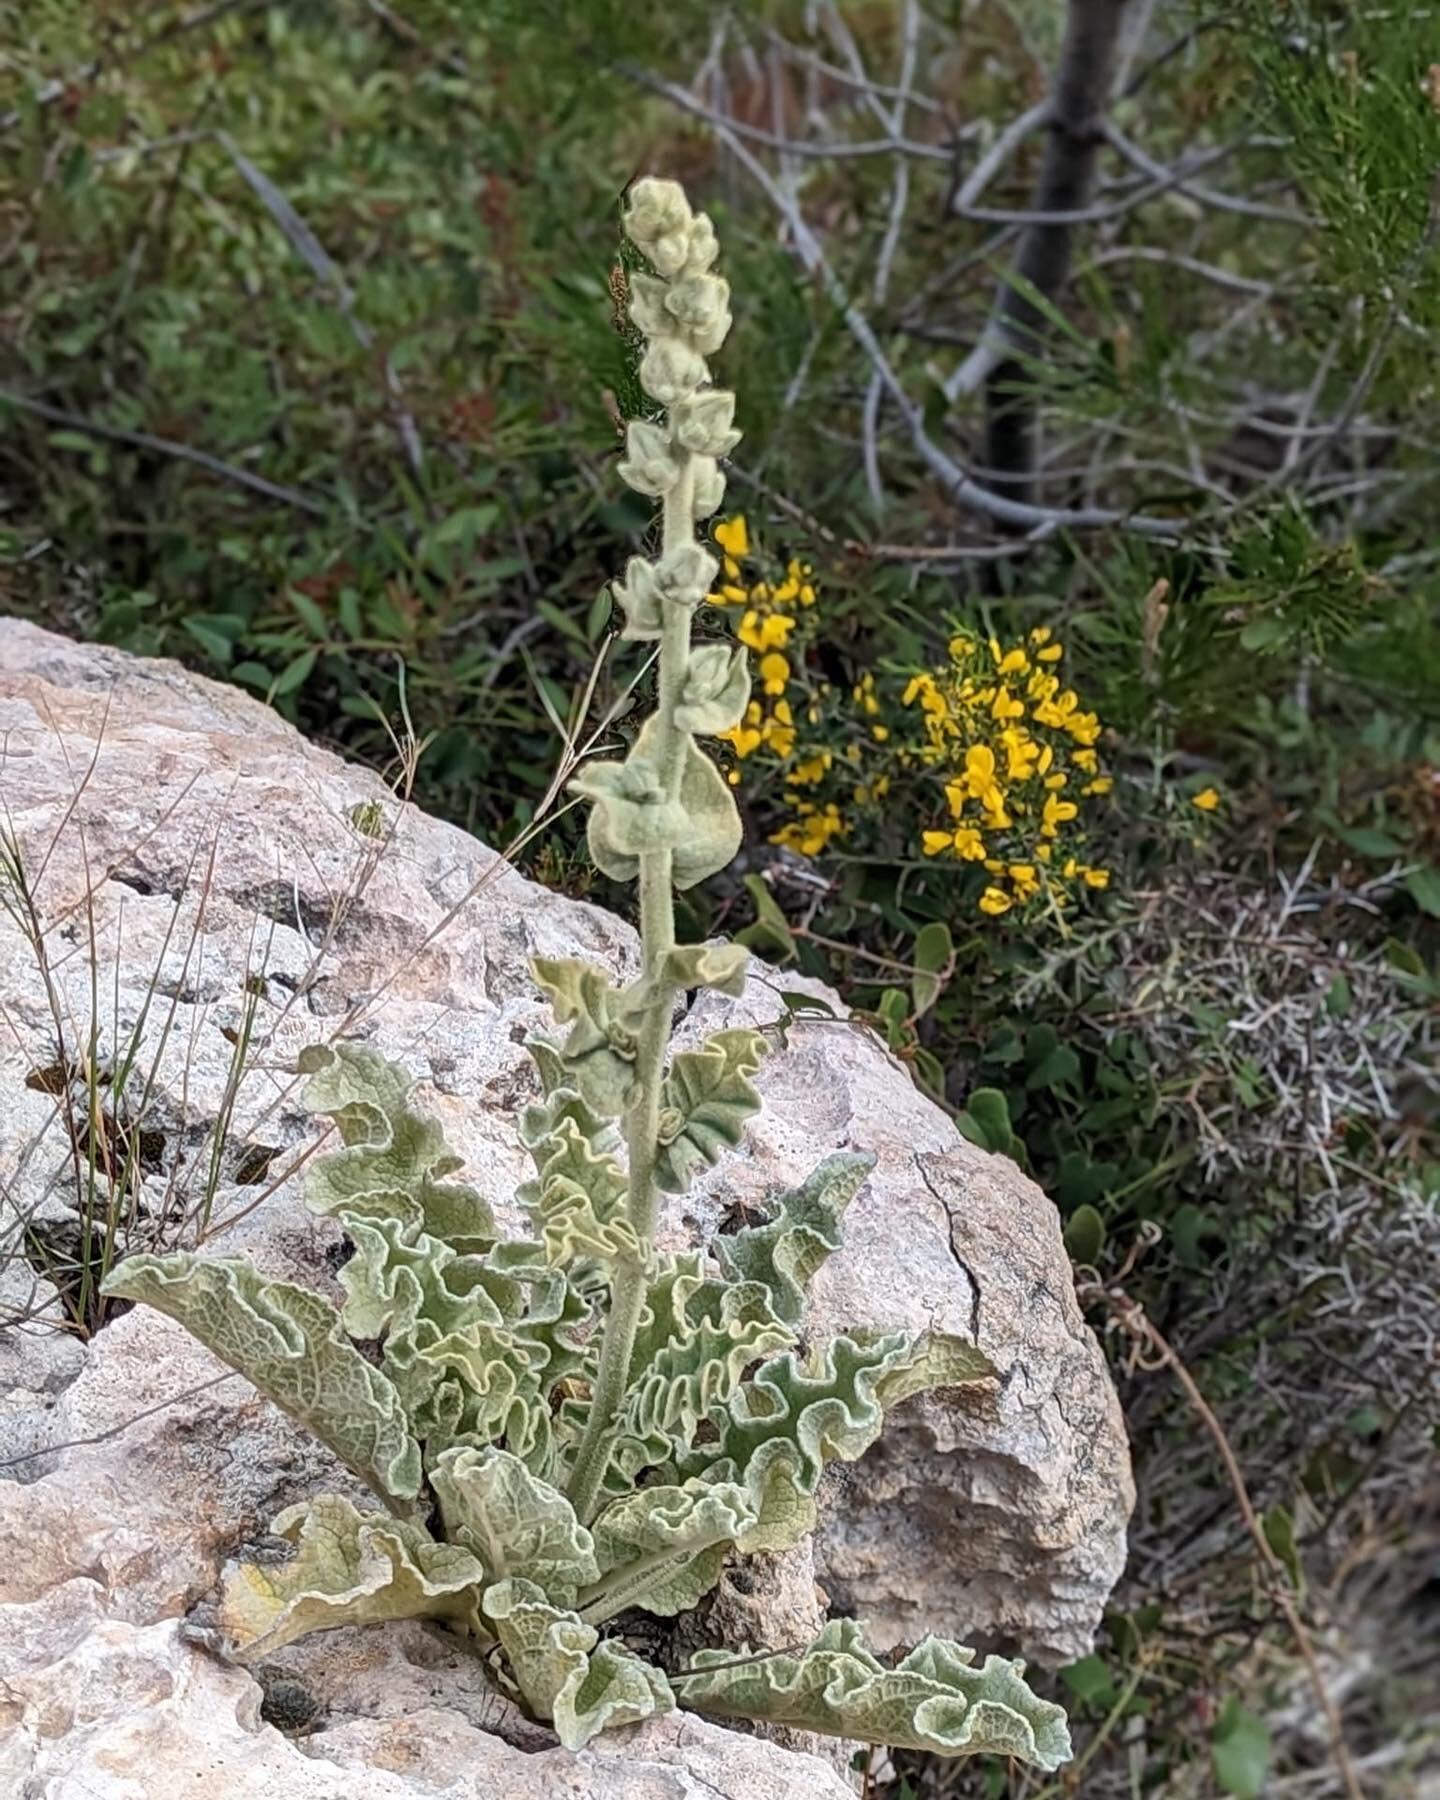 Mullein growing everywhere on our morning hike 🌻

I picked just a few of the flowers to make an ear oil

🌻Mullein is helpful for earaches, ear ulcerations and hearing. 

#mullein #mulleinleaf #herbalist #herbalism #herbalremedies #plantmedicine #he